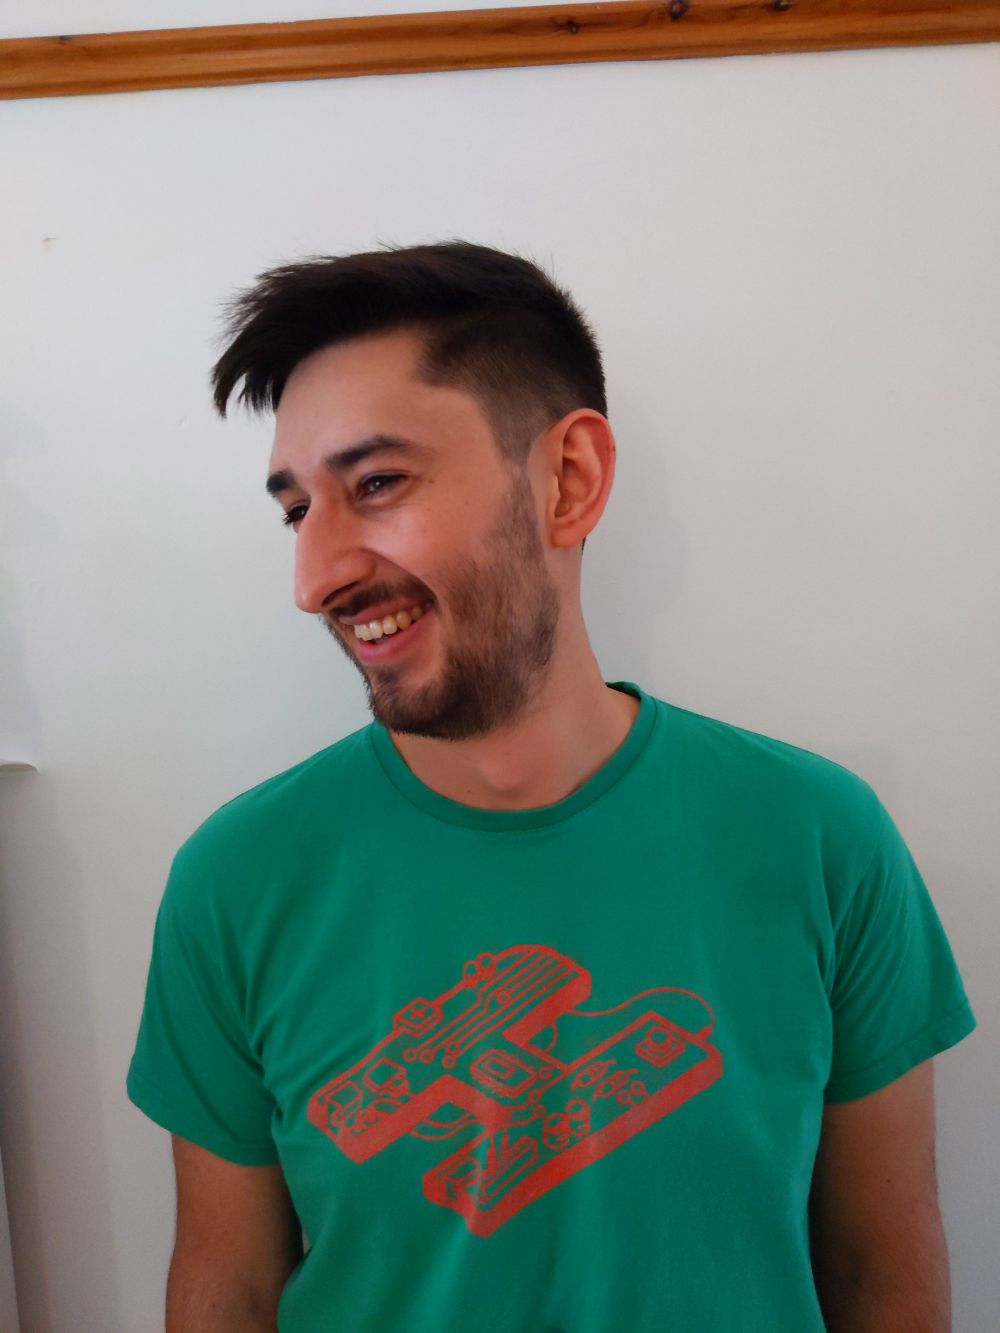 Jamie smiling and slightly looking away from the camera so you can see his new haircut more appropriately - a short haircut combed over with an undercut, and a trimmed beard - while wearing a Hack the Holidays hackathon t-shirt